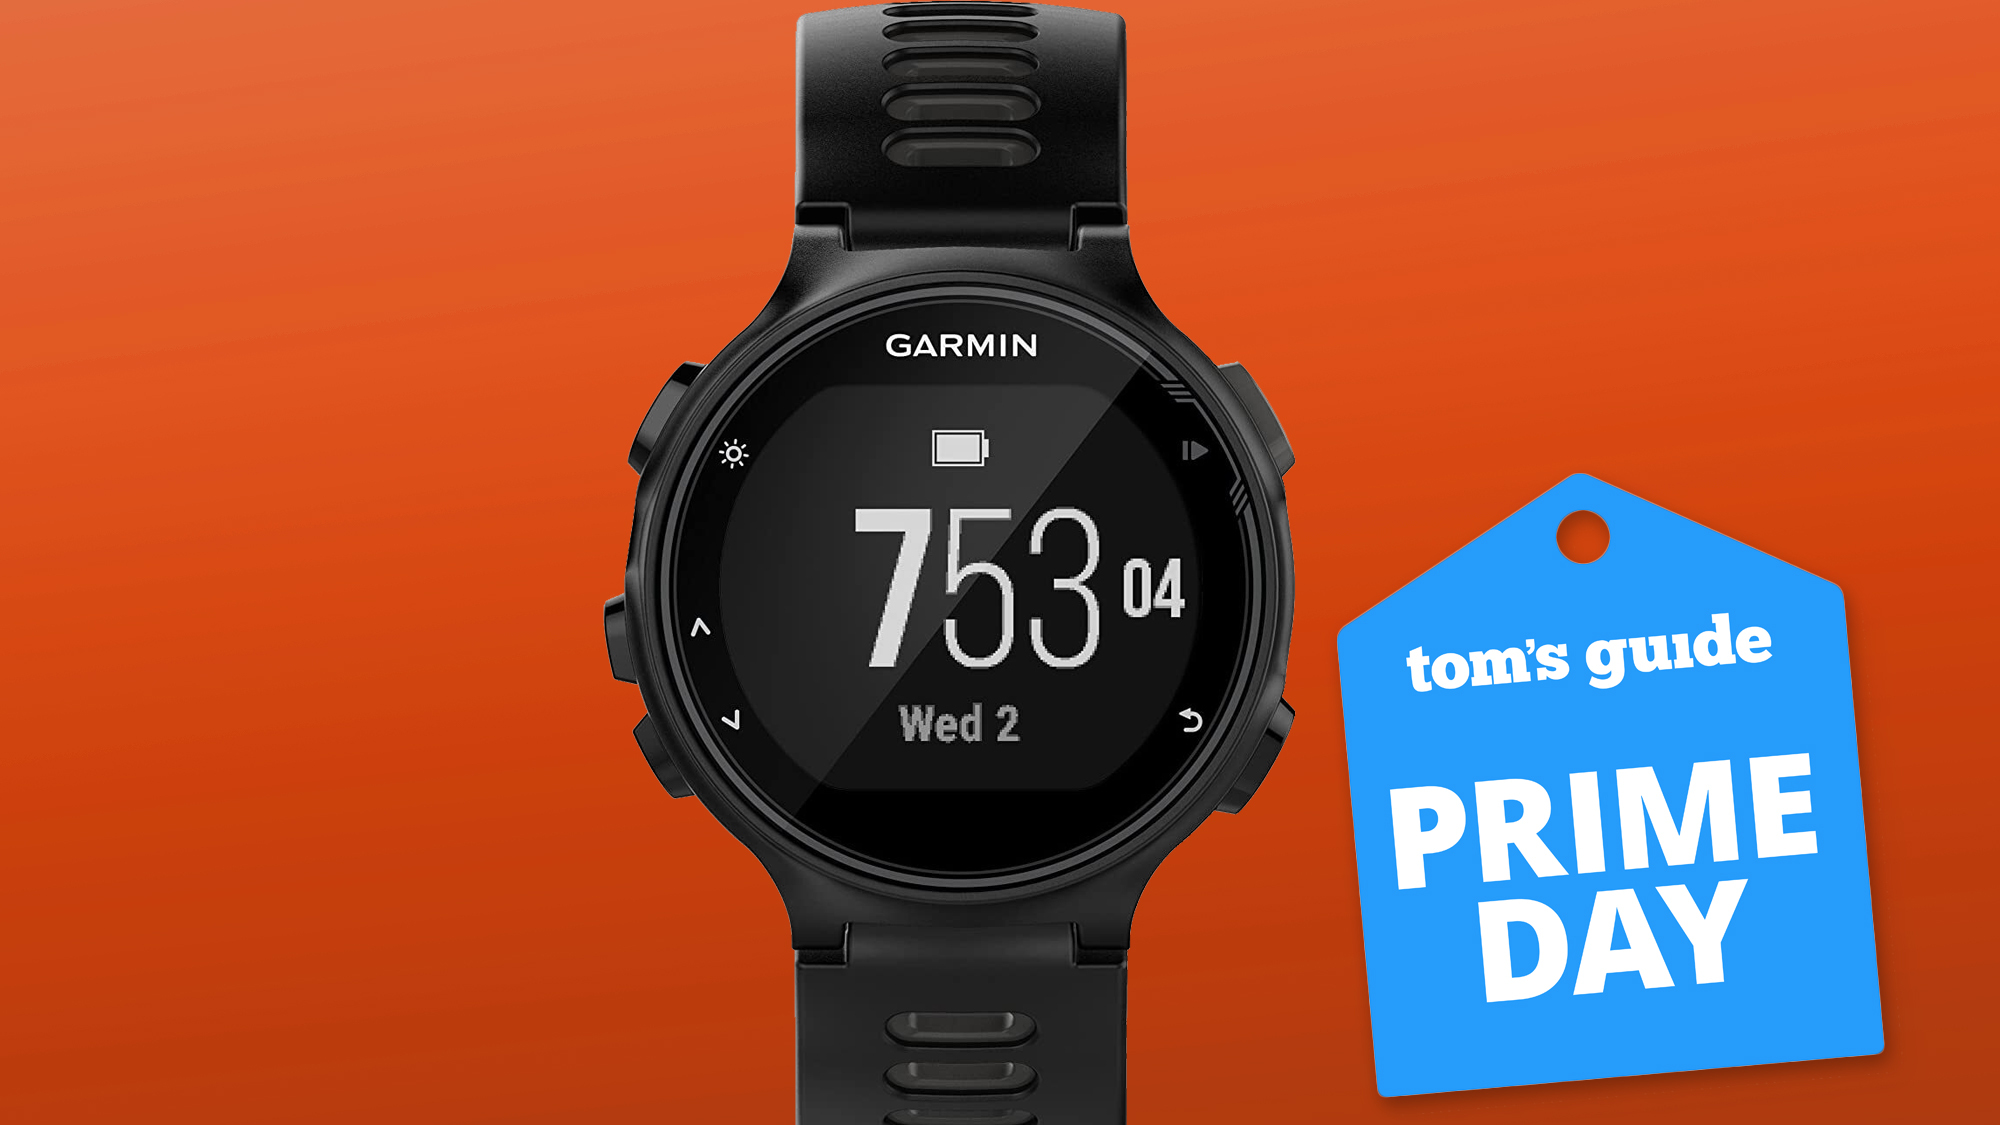 Save $60 on the Garmin Forerunner GPS Running Watch with this Prime Day deal | Tom's Guide